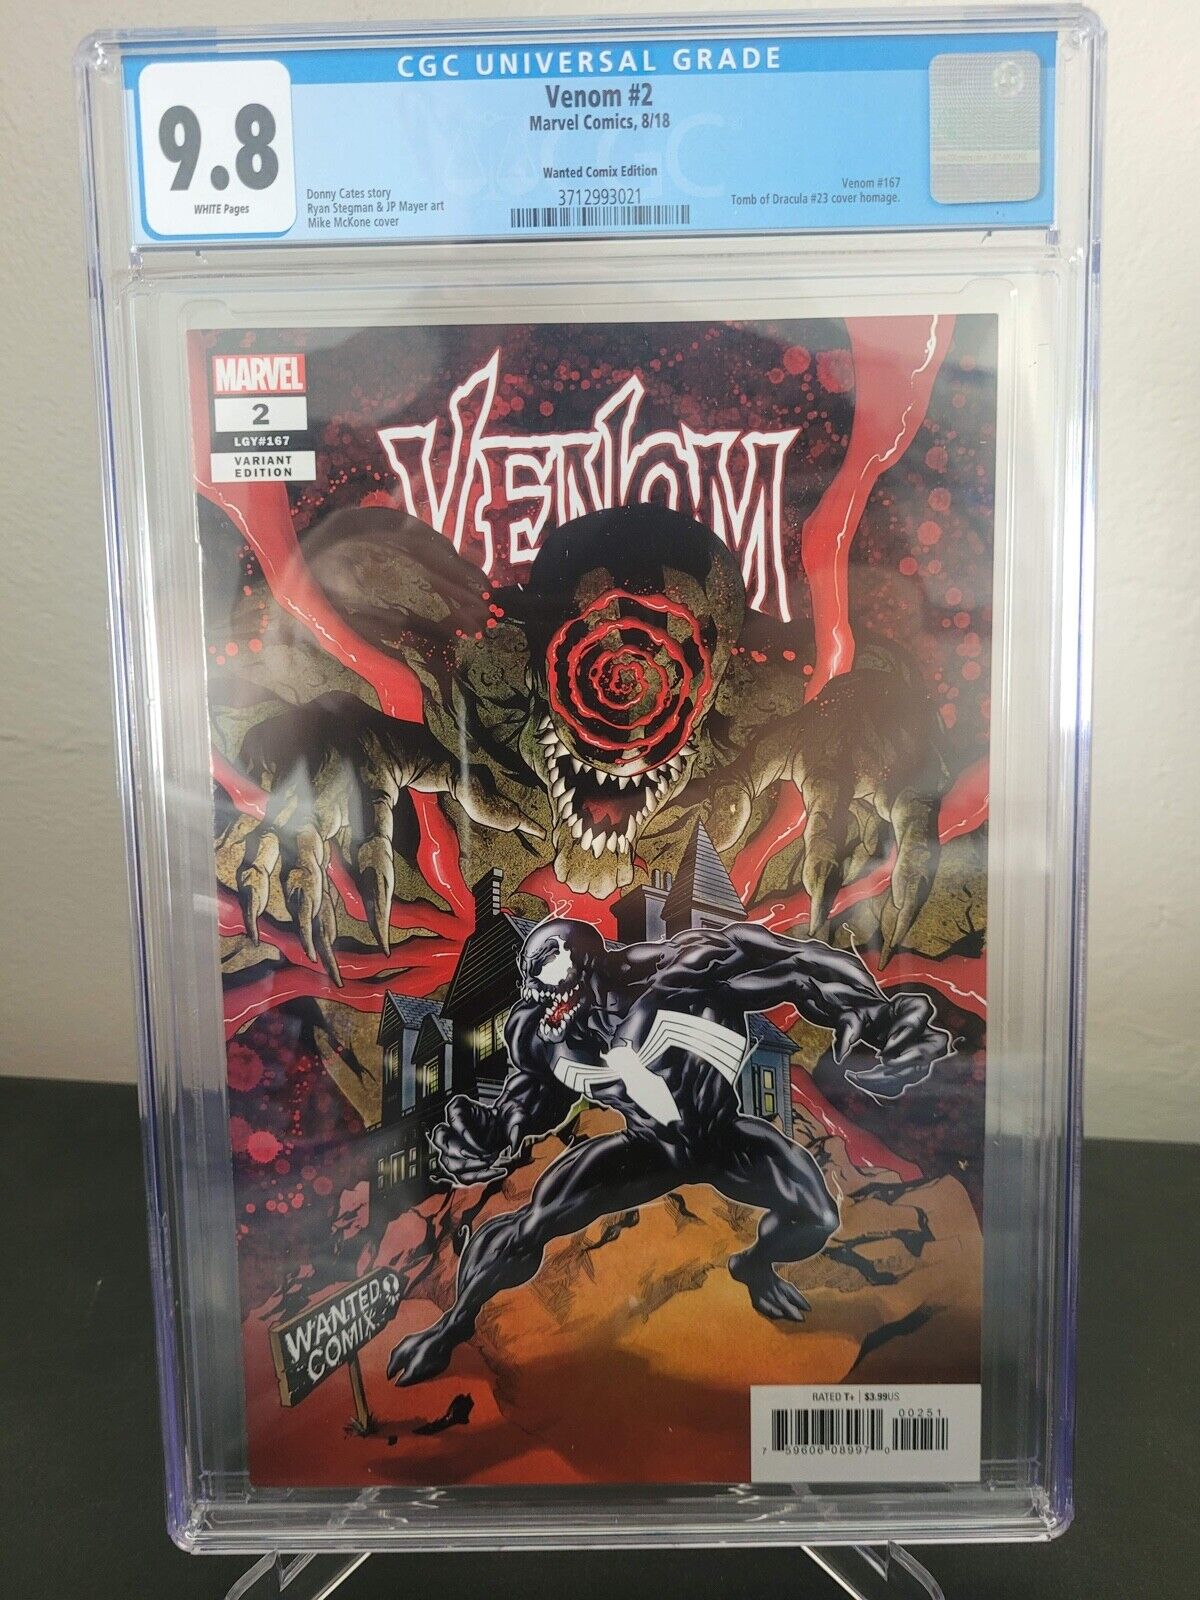 VENOM #2 CGC 9.8 GRADED 2018 WANTED COMIX EDITION TOMB OF DRACULA HOMAGE VARIANT